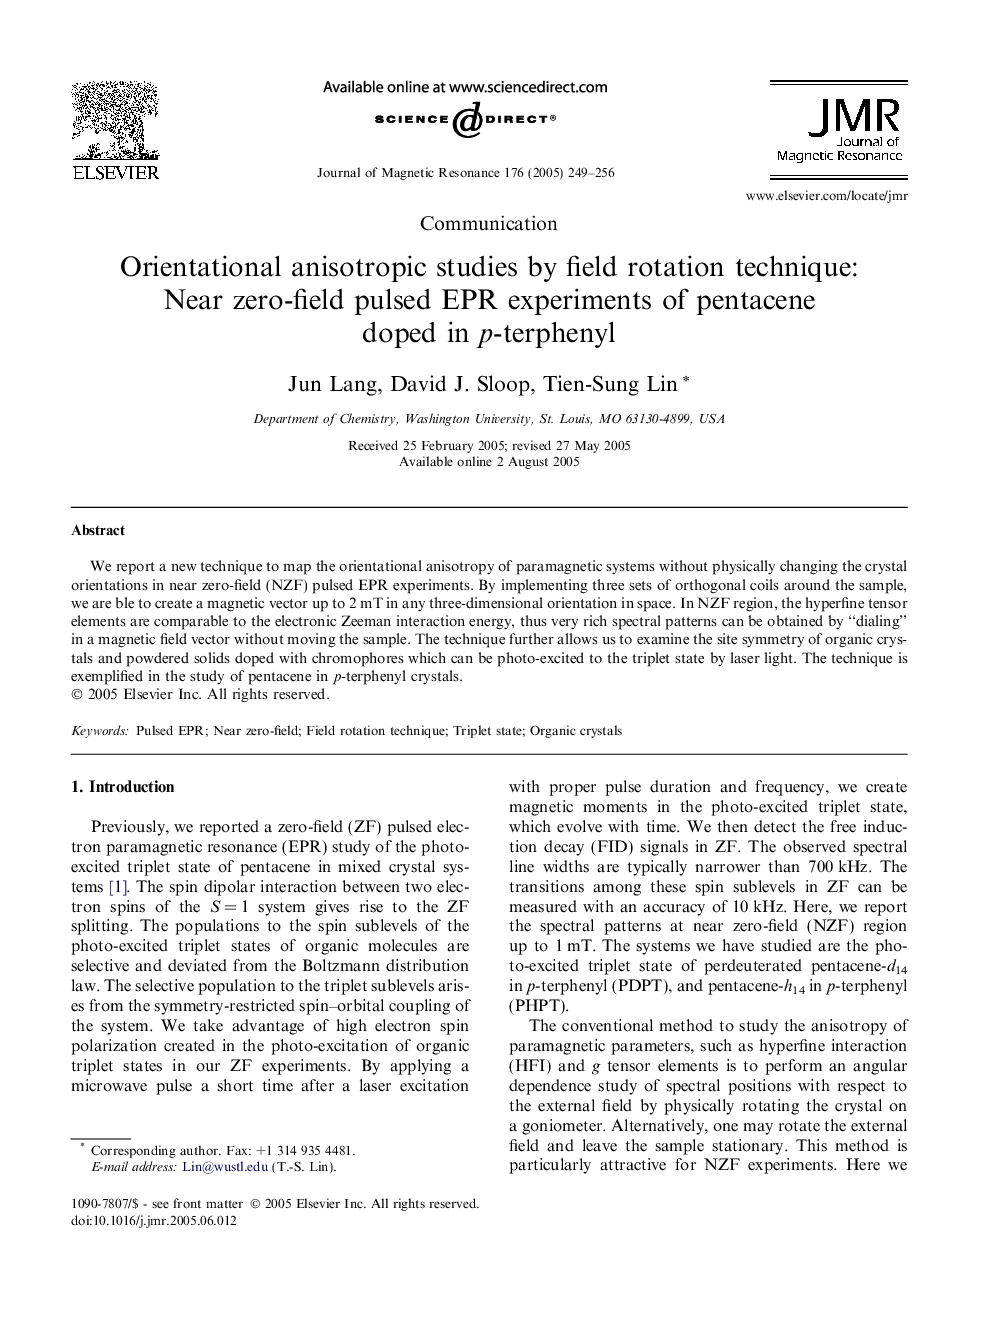 Orientational anisotropic studies by field rotation technique: Near zero-field pulsed EPR experiments of pentacene doped in p-terphenyl